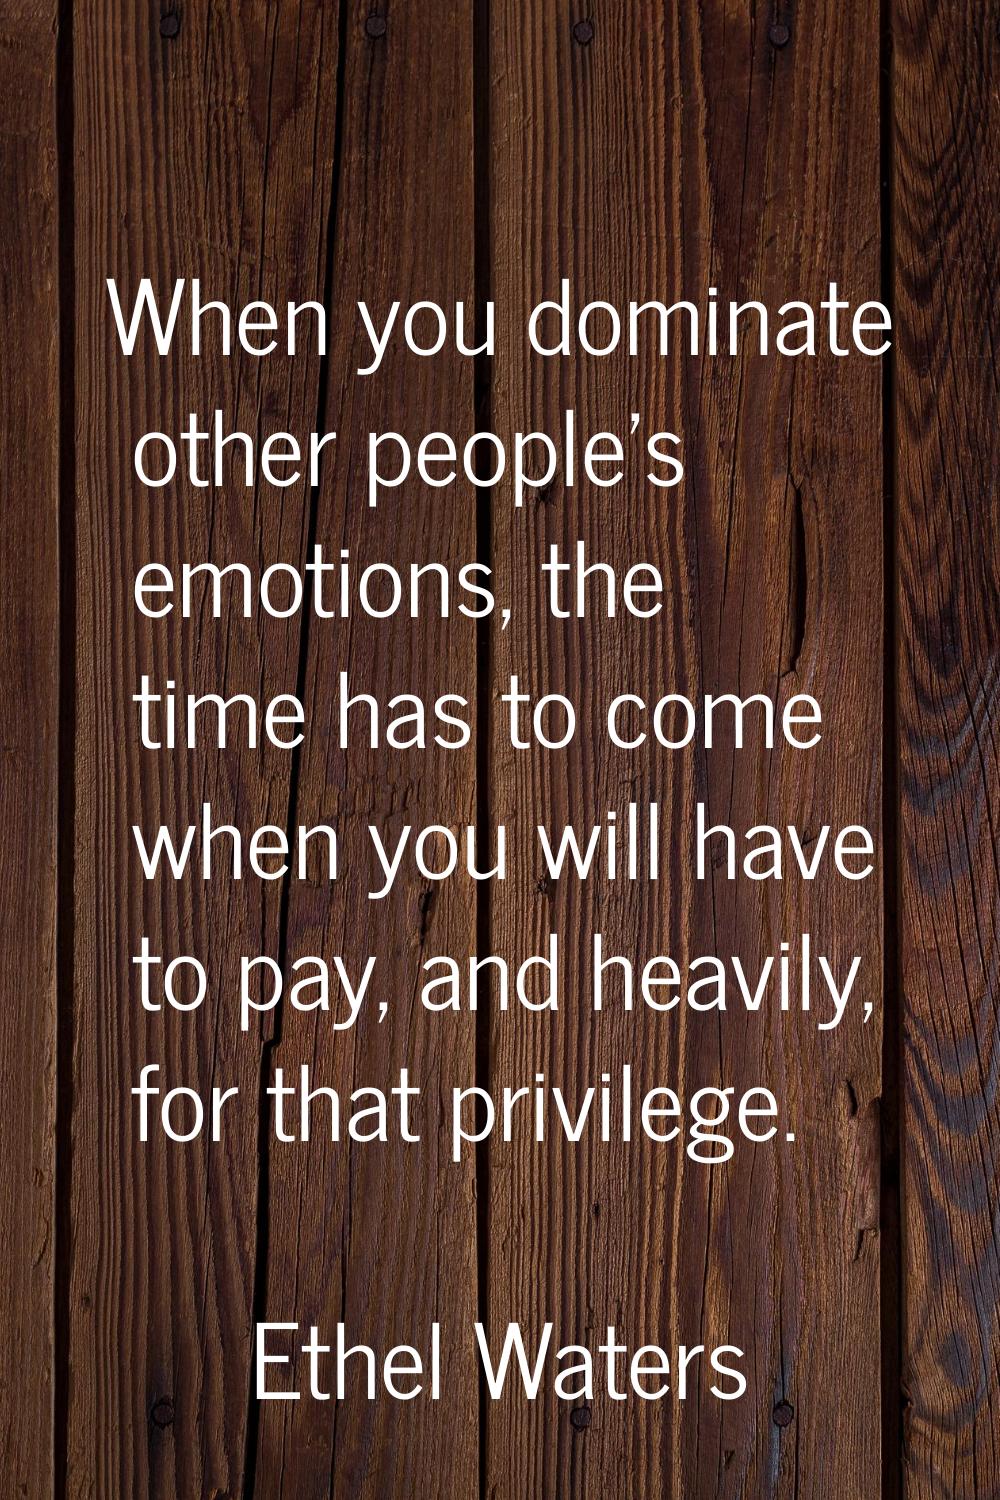 When you dominate other people's emotions, the time has to come when you will have to pay, and heav